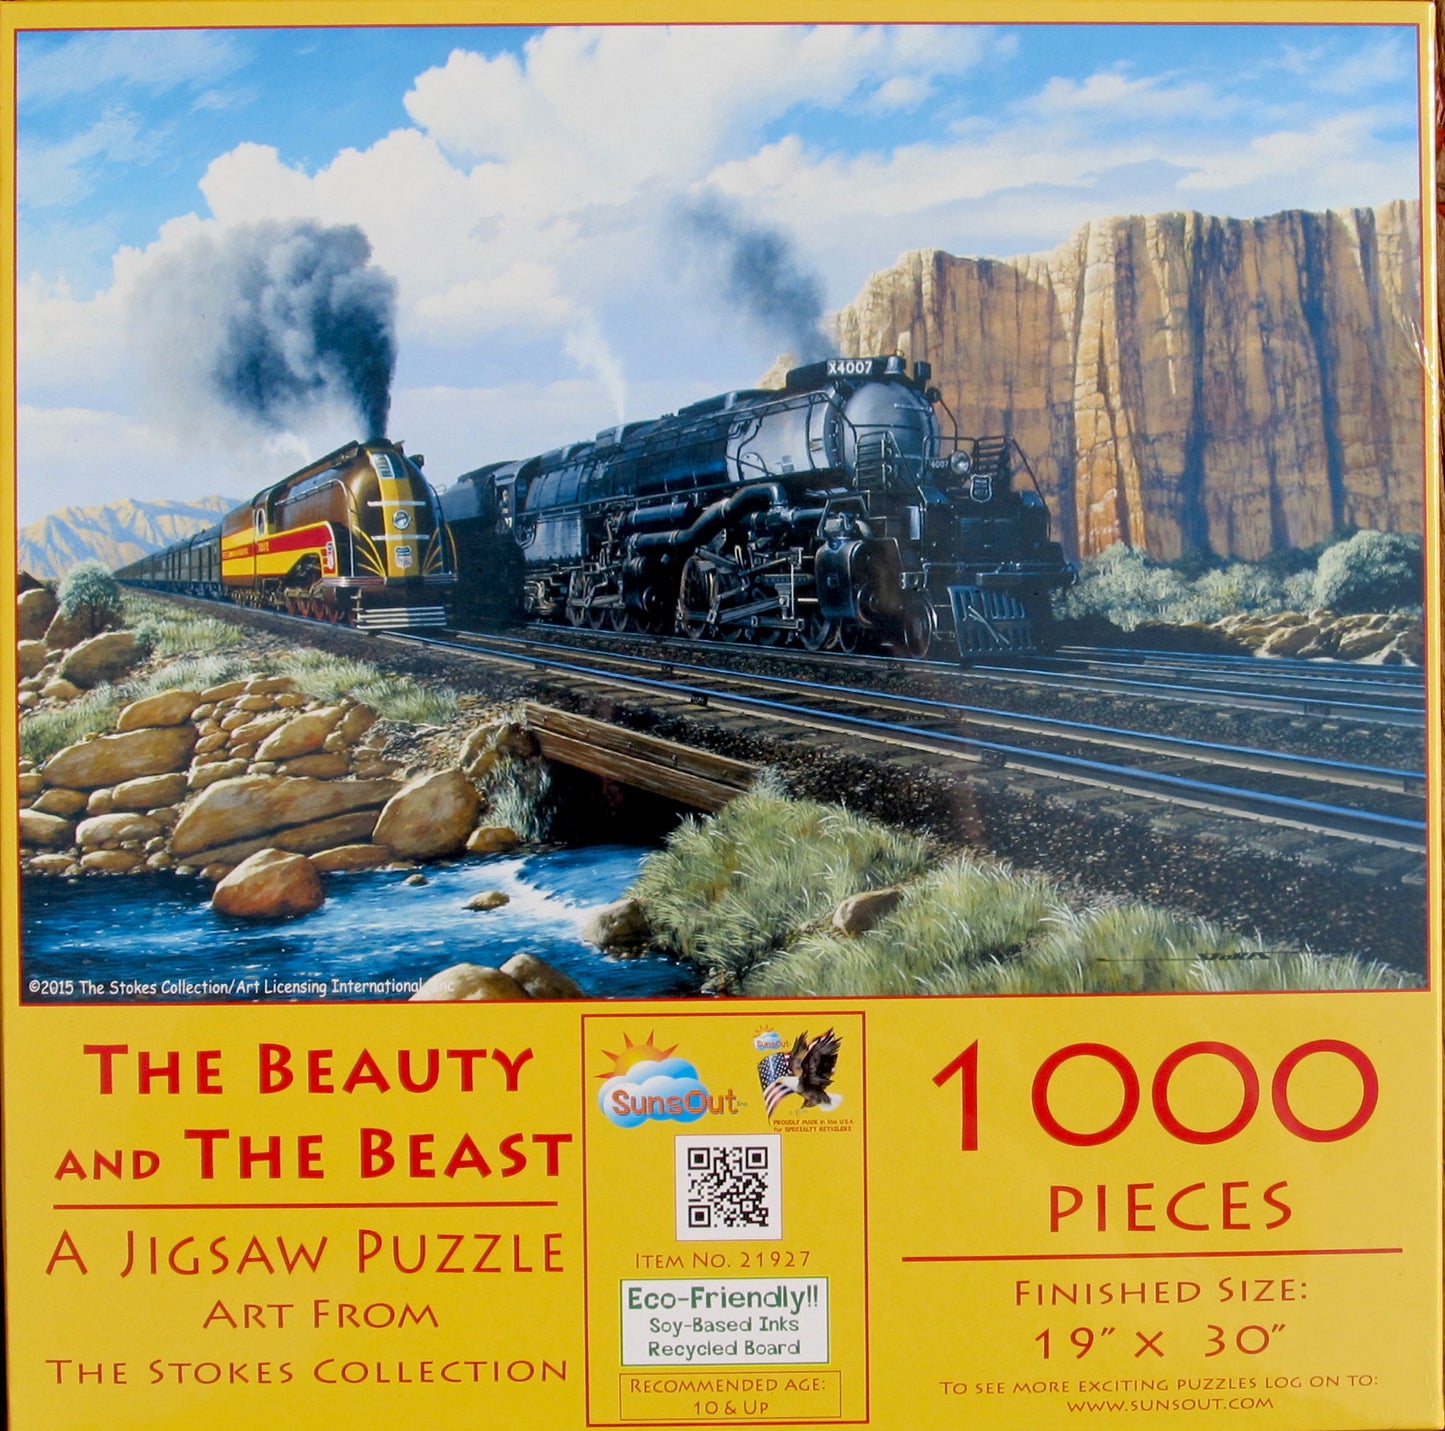 The Beauty and the Beast from The Stokes Collection, 1000 Piece Puzzle